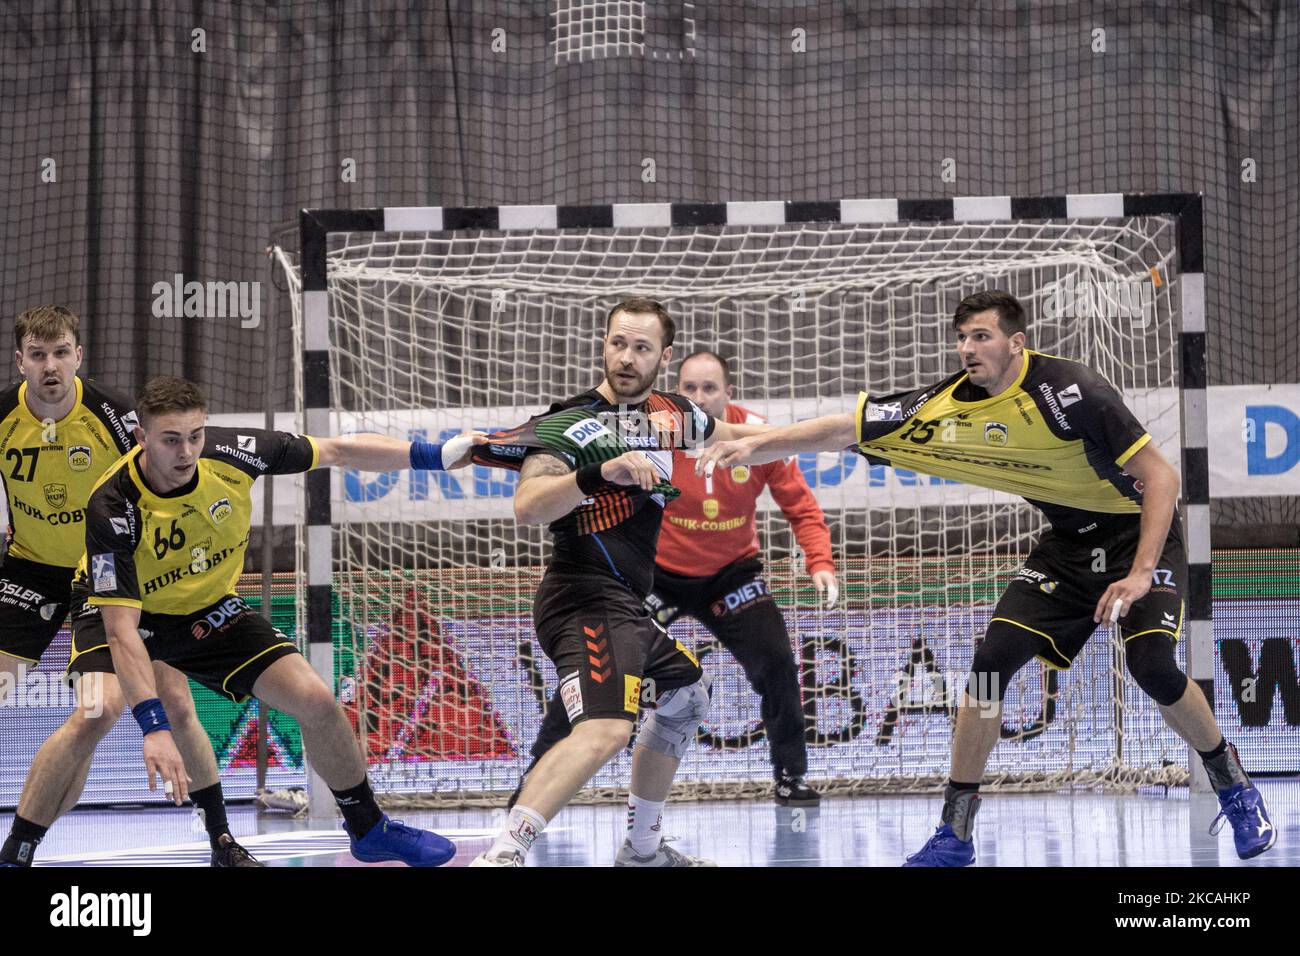 Moritz Preuss of SC Magdeburg (mi.) is attacked by Stepan Zeman (left) and Drasko Nenadic (right) of HSC 2000 Coburg during the LIQUI MOLY Handball-Bundesliga match between SC Magdeburg and HSC 2000 Coburg at GETEC-Arena on March 07, 2021 in Magdeburg, Germany. (Photo by Peter Niedung/NurPhoto) Stock Photo